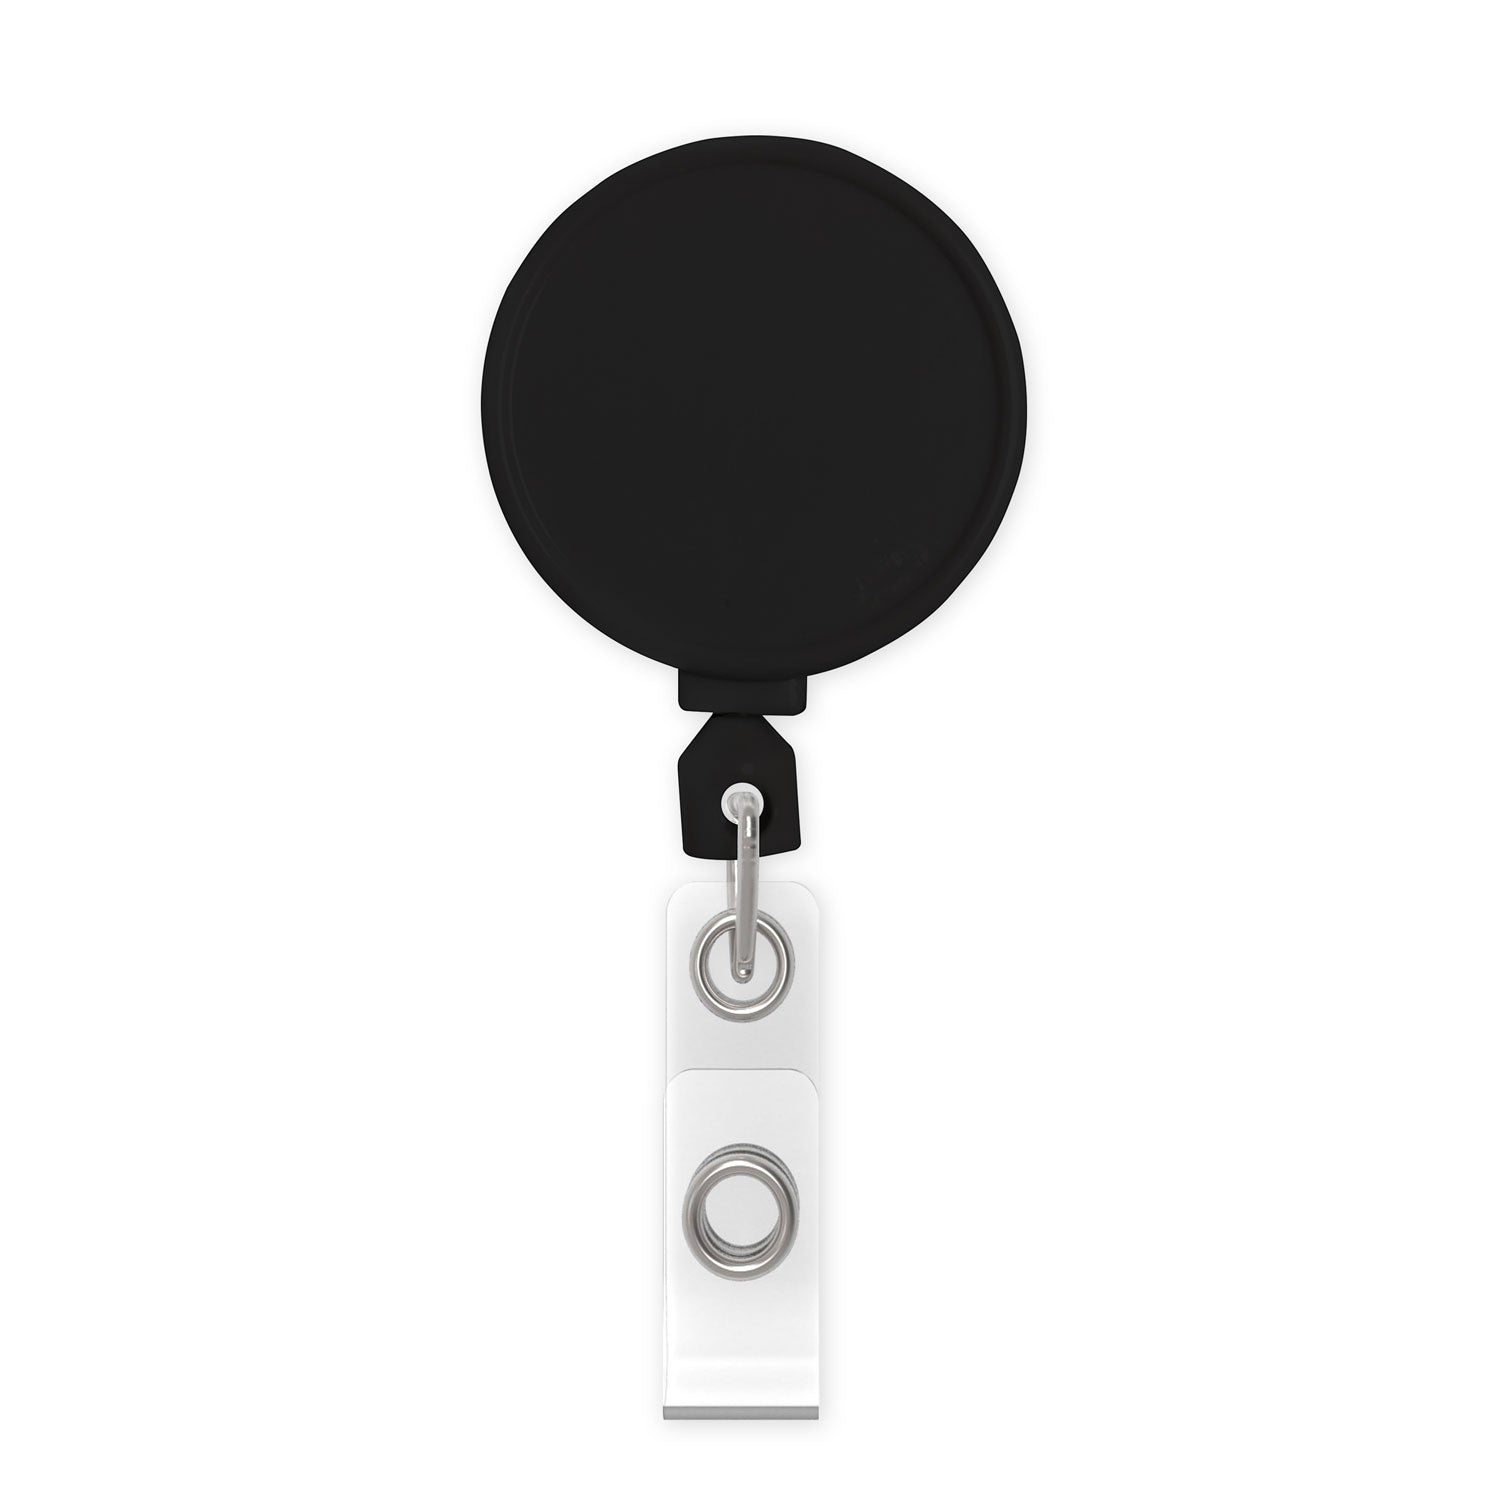 Retractable I.D. Round Badge Holders